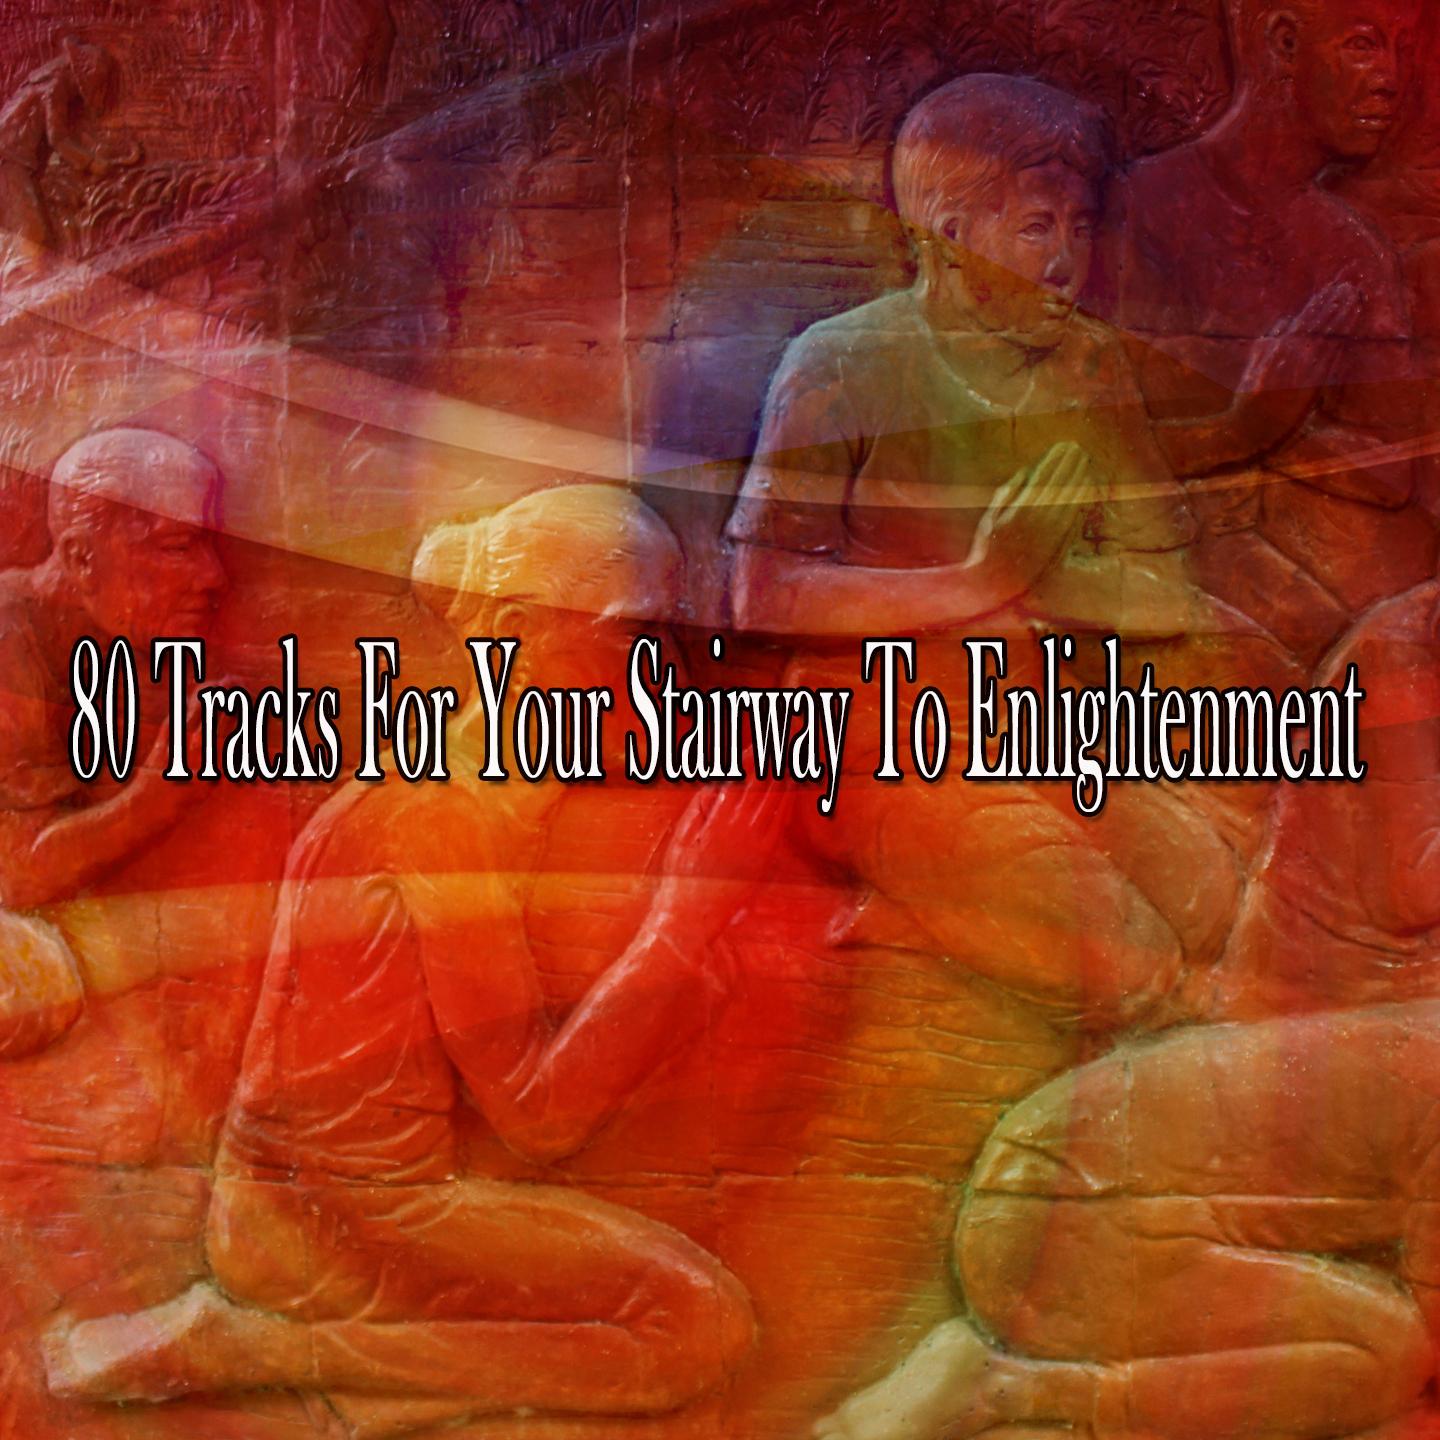 80 Tracks for Your Stairway to Enlightenment